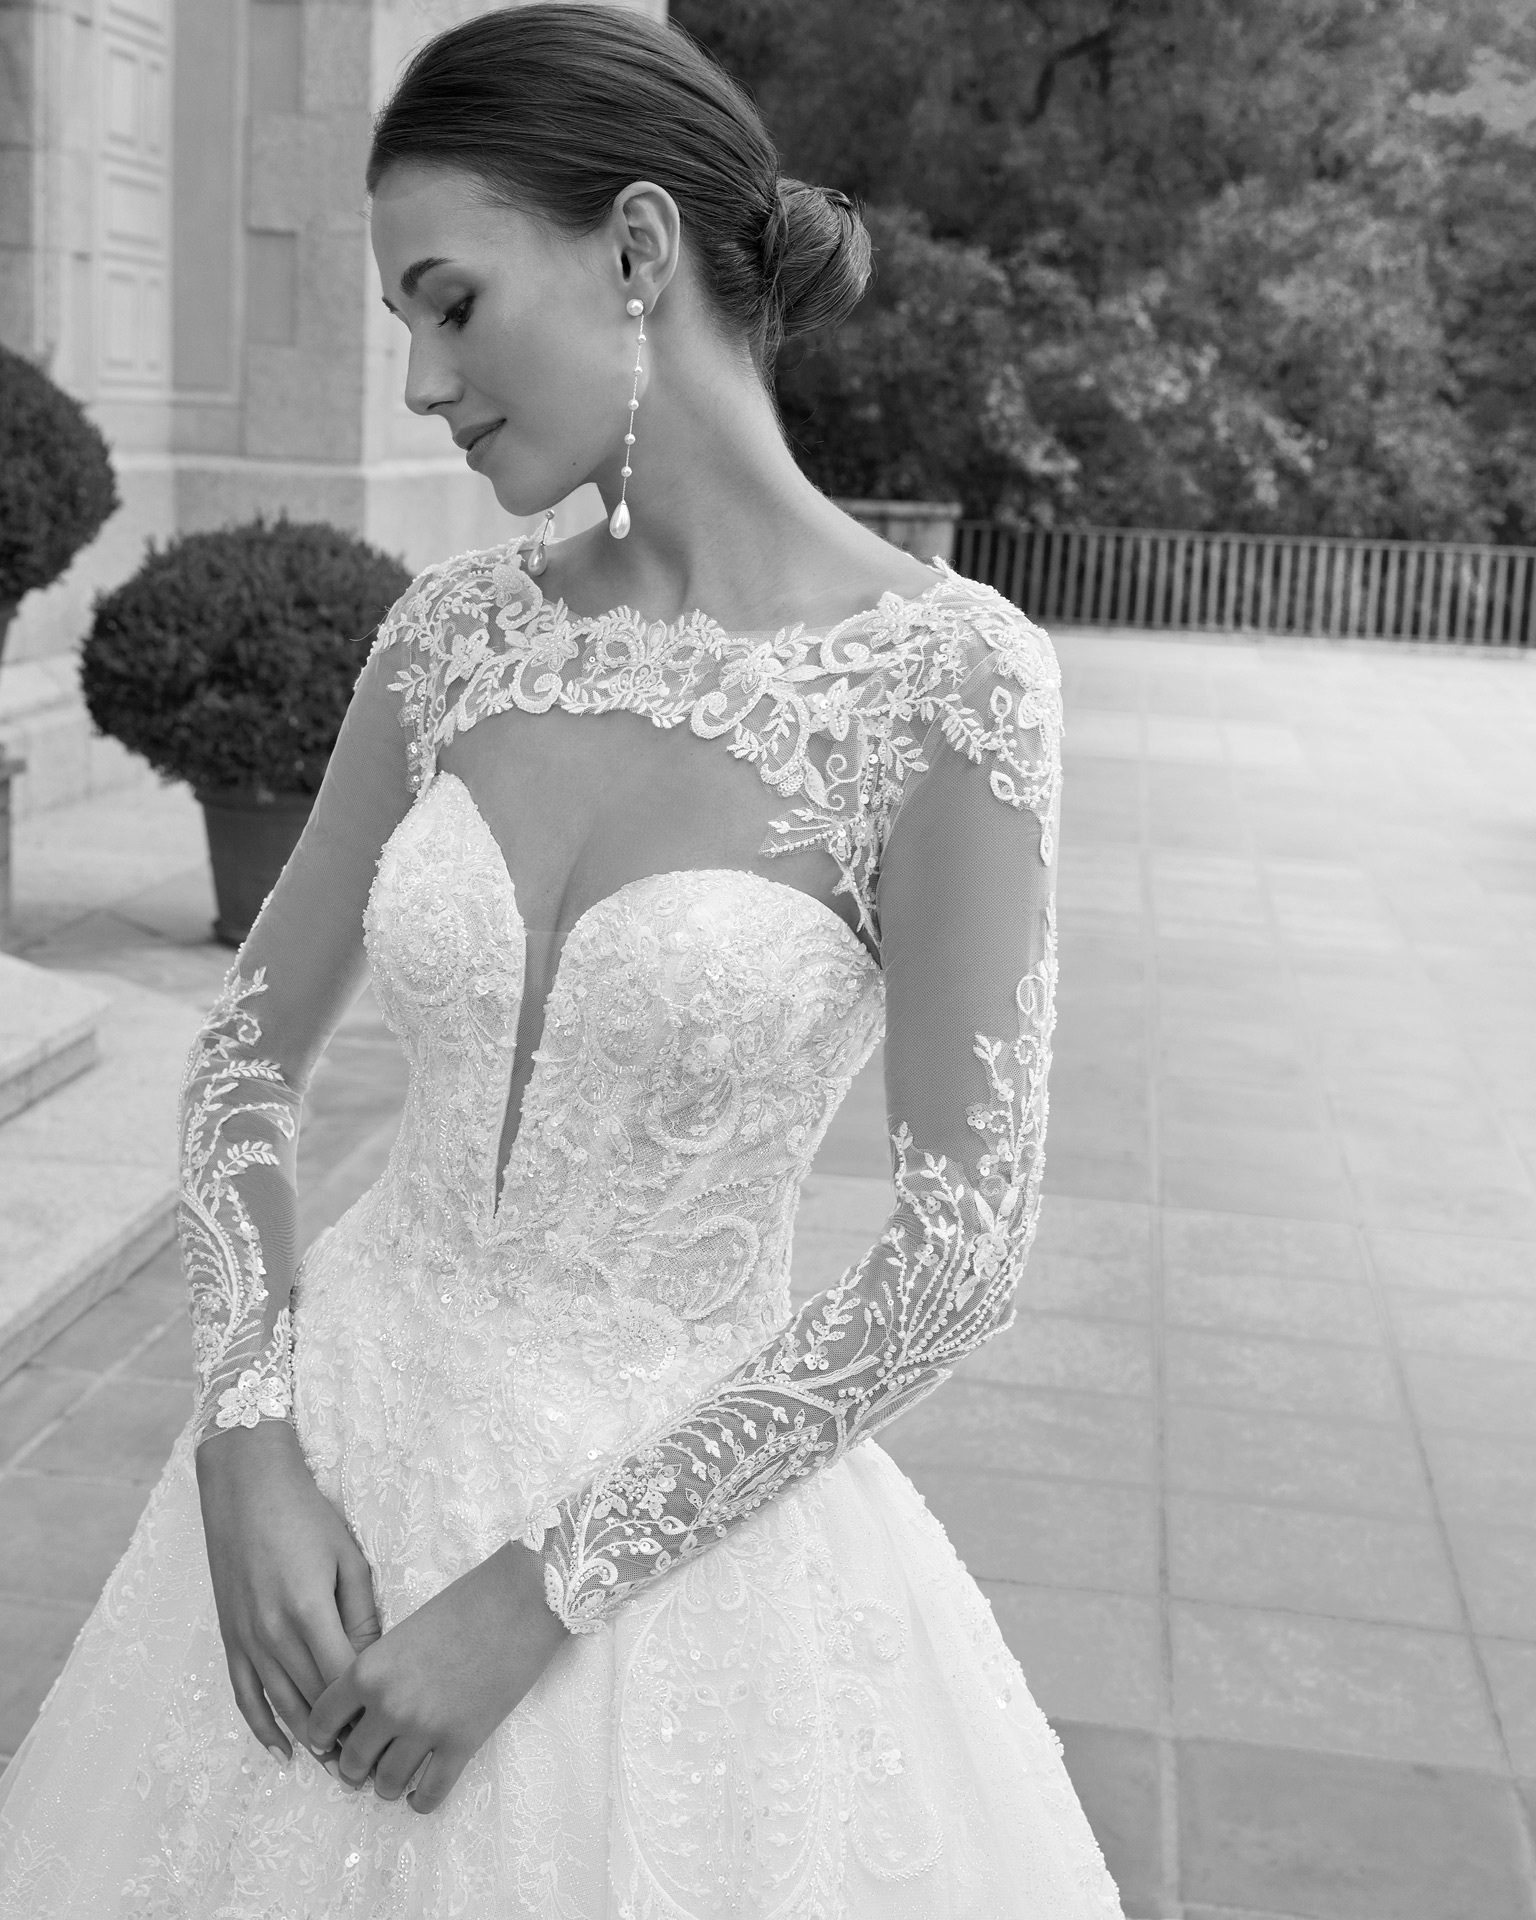 Romantic two-piece princess wedding dress, made with lace and beadwork. Featuring a sweetheart neckline, buttoned back and detachable straps, complemented by a lace and beadwork jacket. Wear this dreamy Luna Studio outfit with pride. LUNA_NOVIAS.